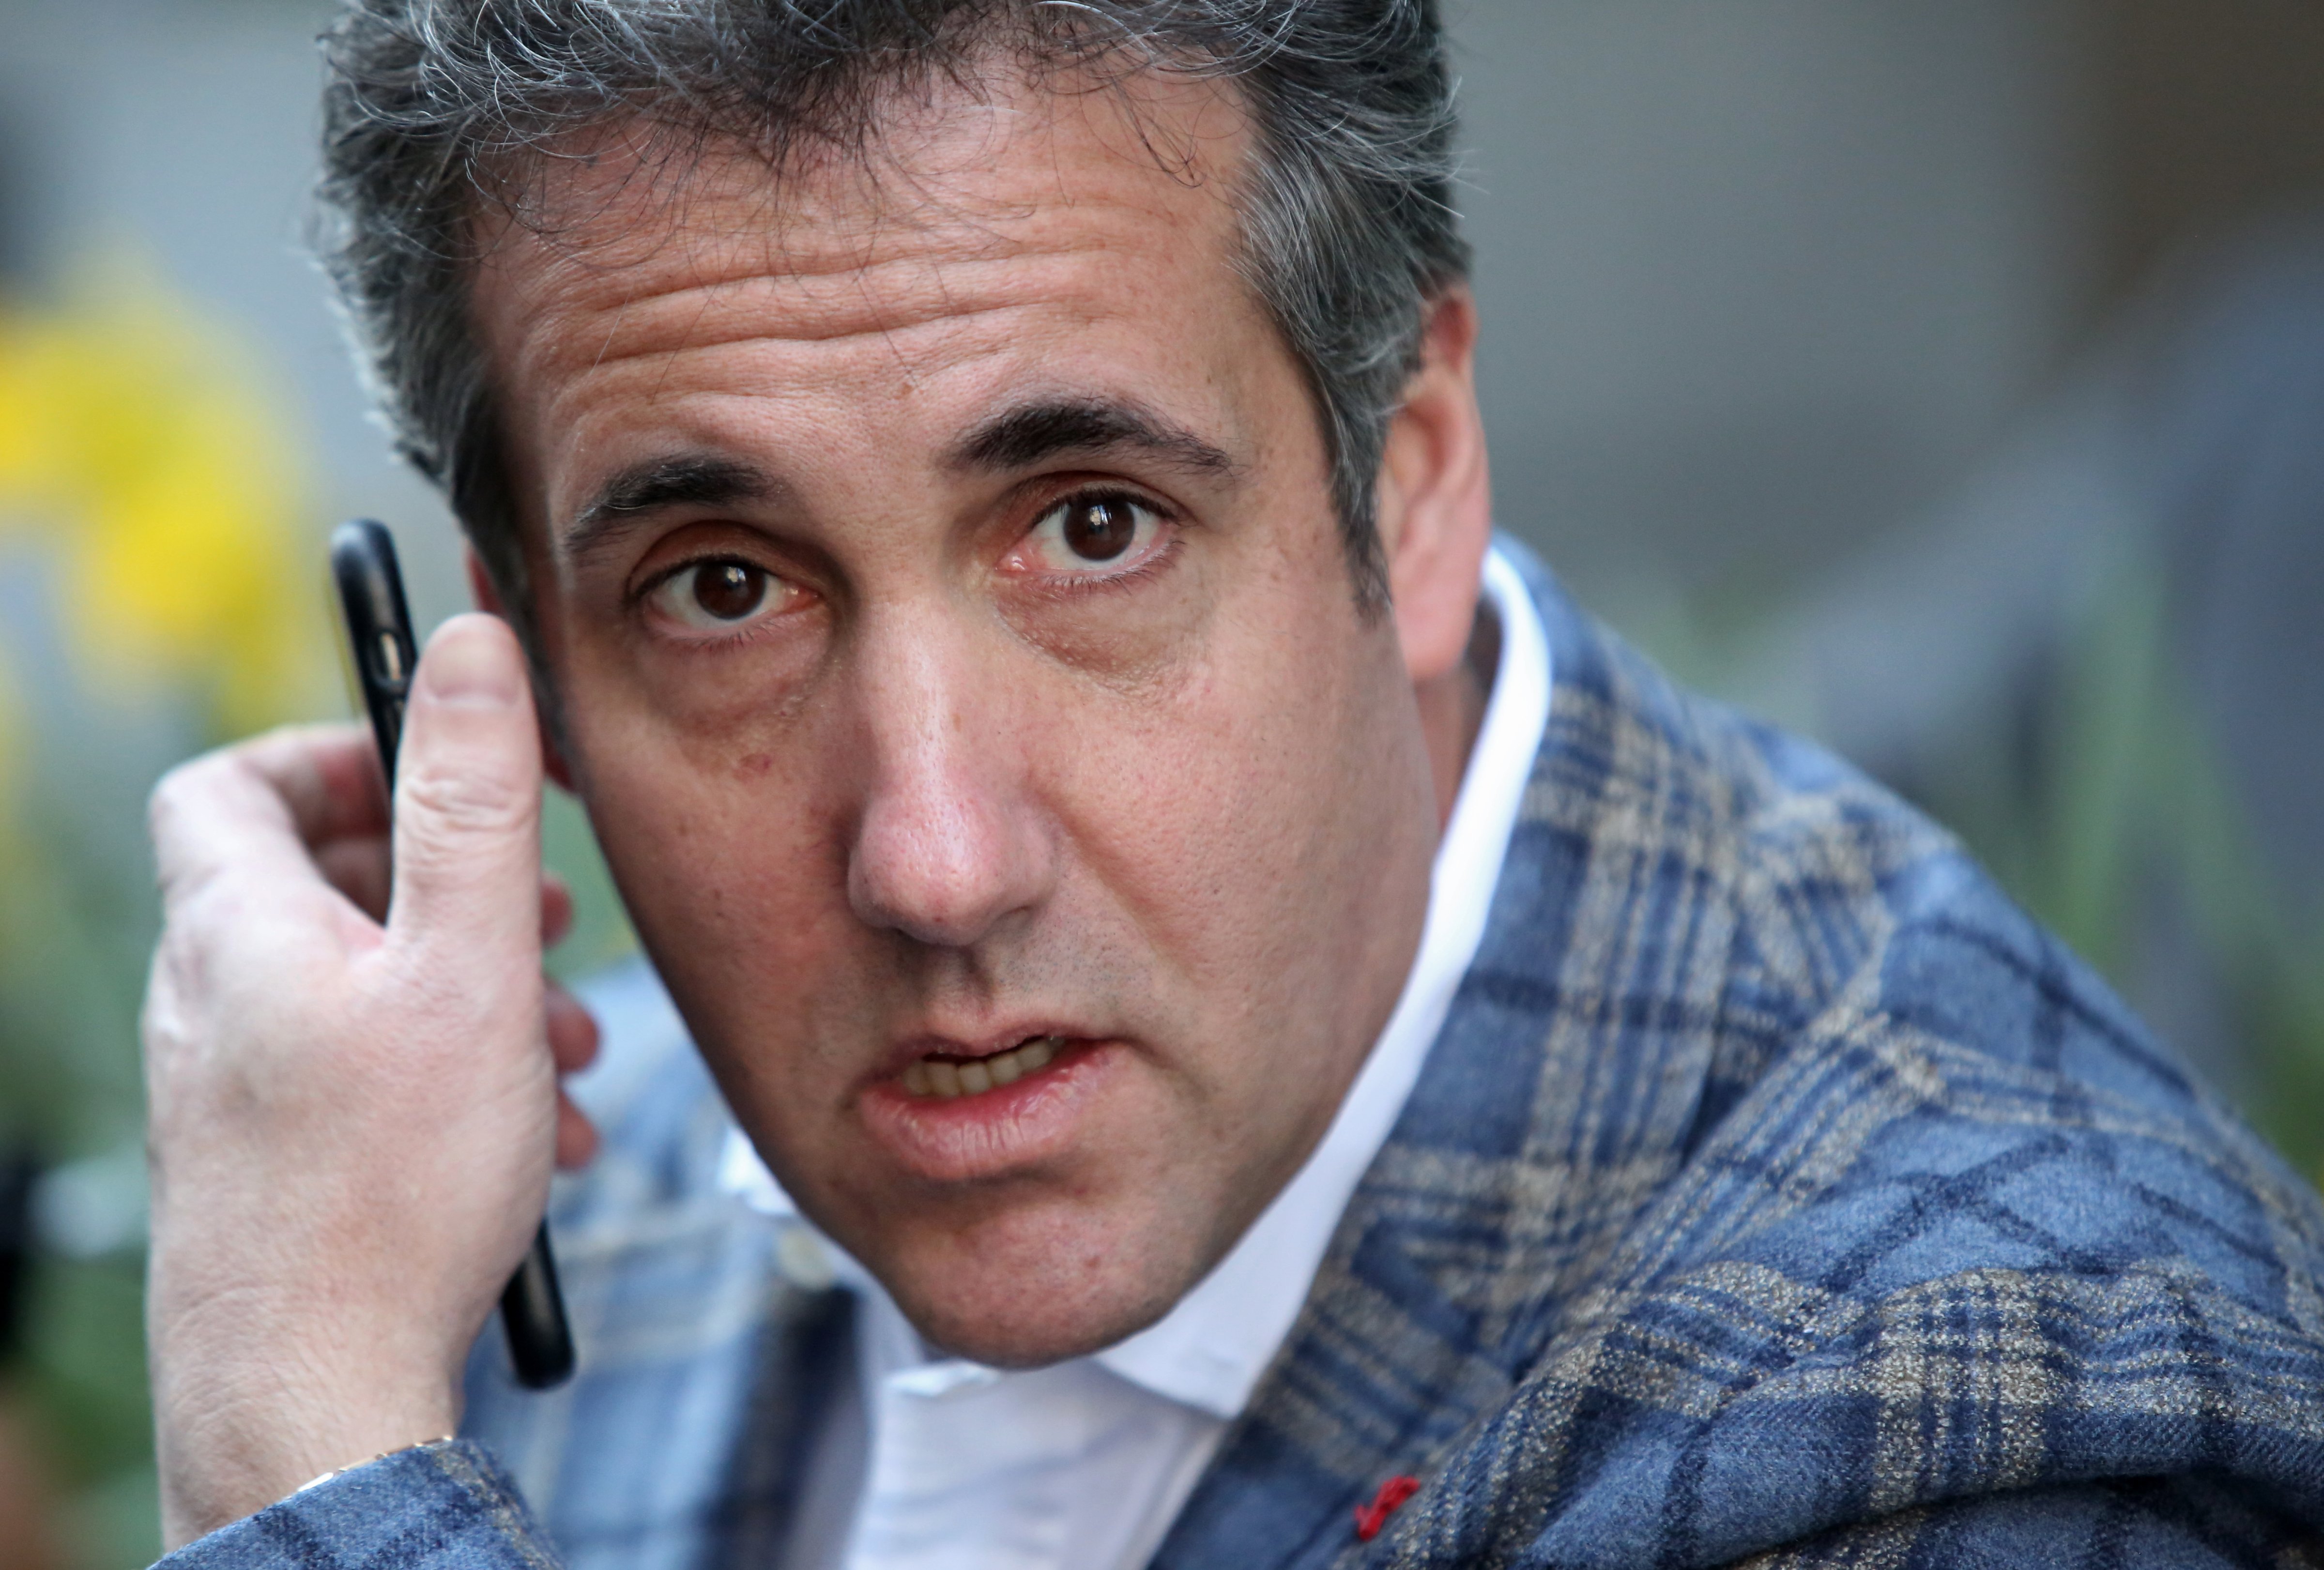 Michael Cohen, President Donald Trump's personal attorney, on Apr. 13, 2018 in New York City (Yana Paskova—Getty Images)